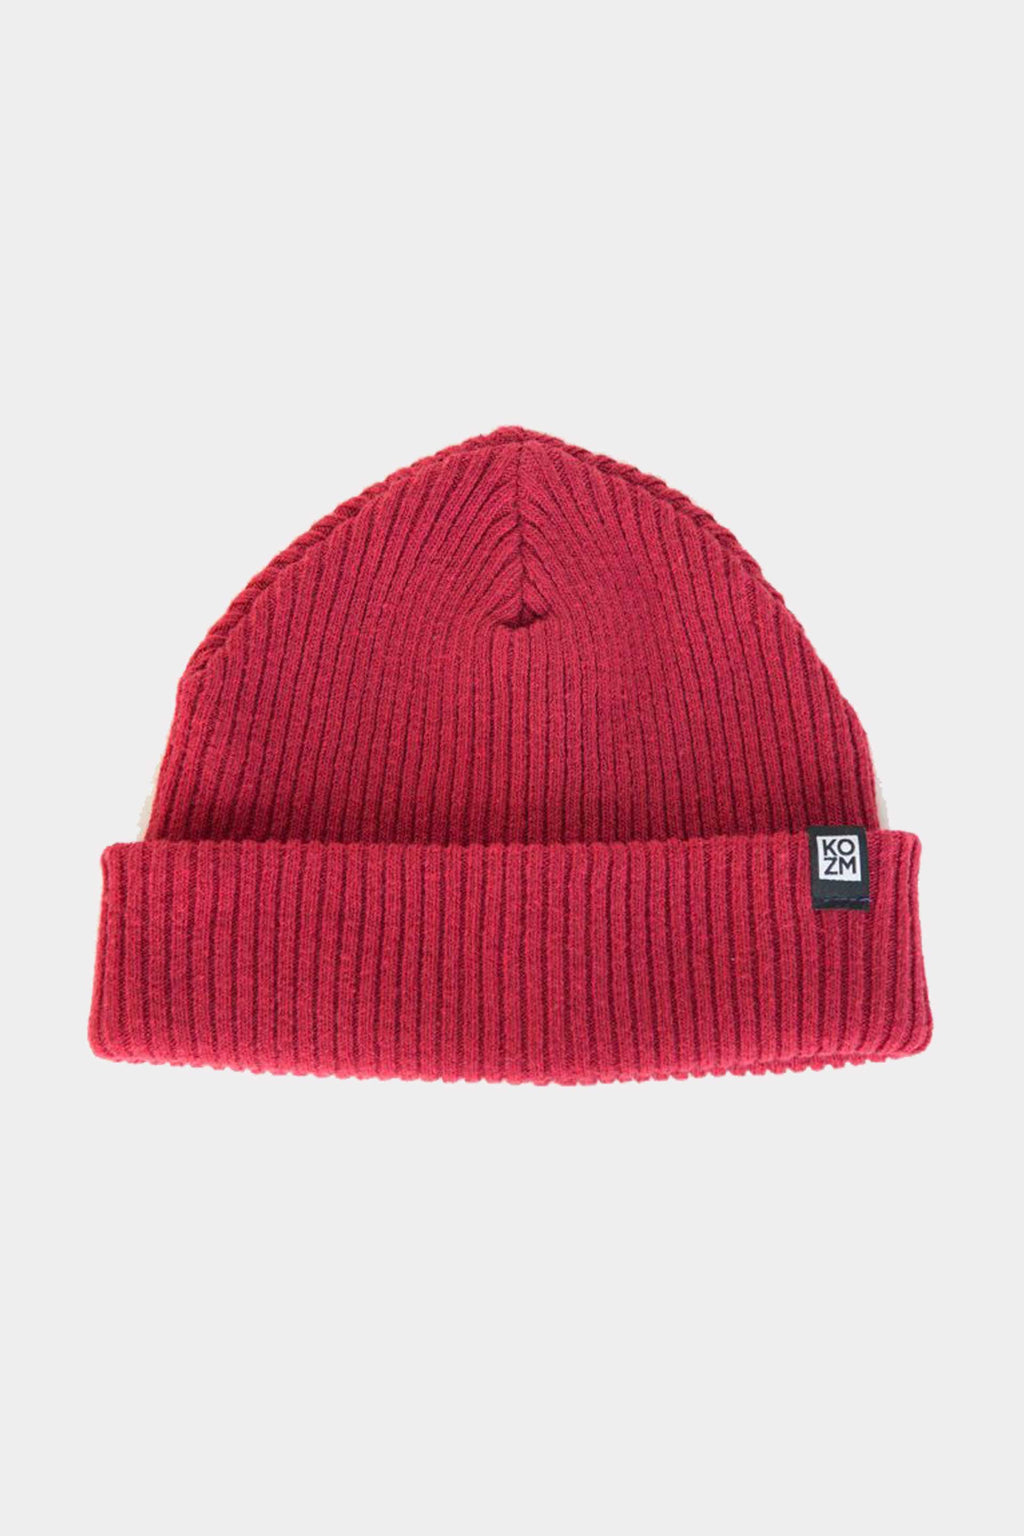 The Red Beanie